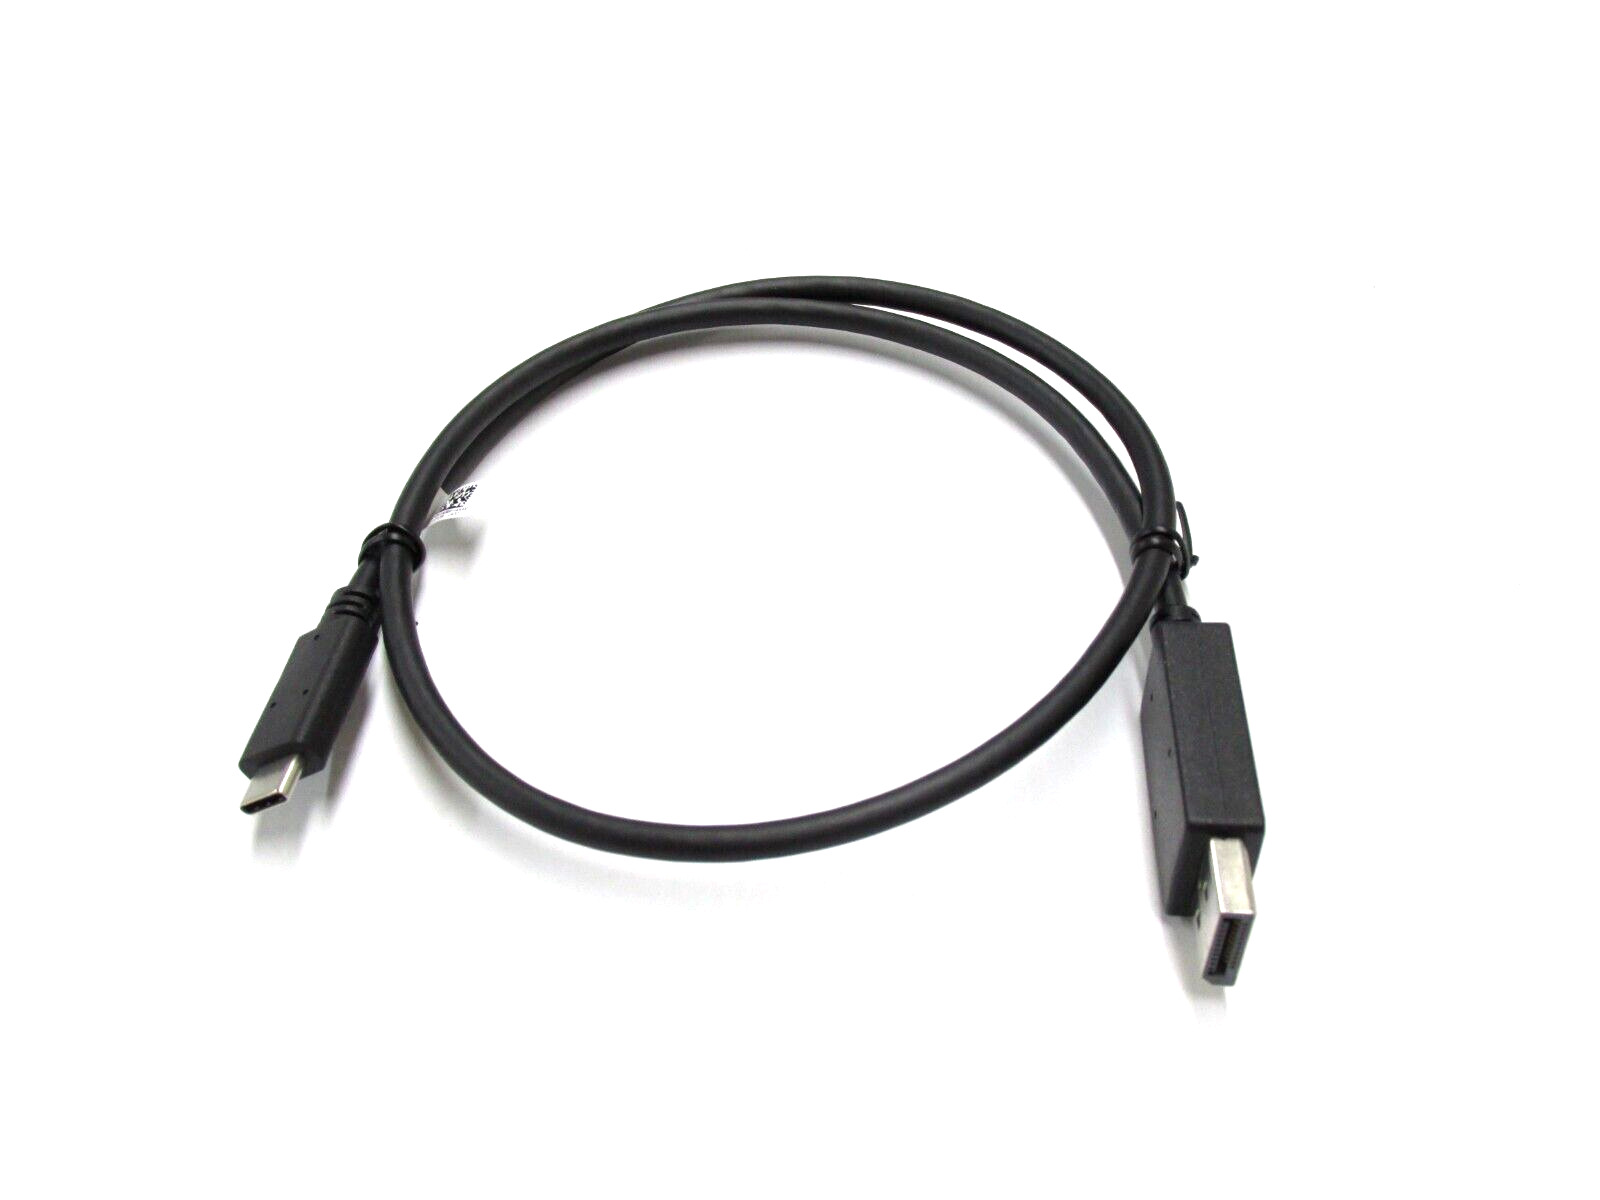 New Dell OEM DisplayPort Male to USB-C Male Video Cable -0.5M- N1NM8